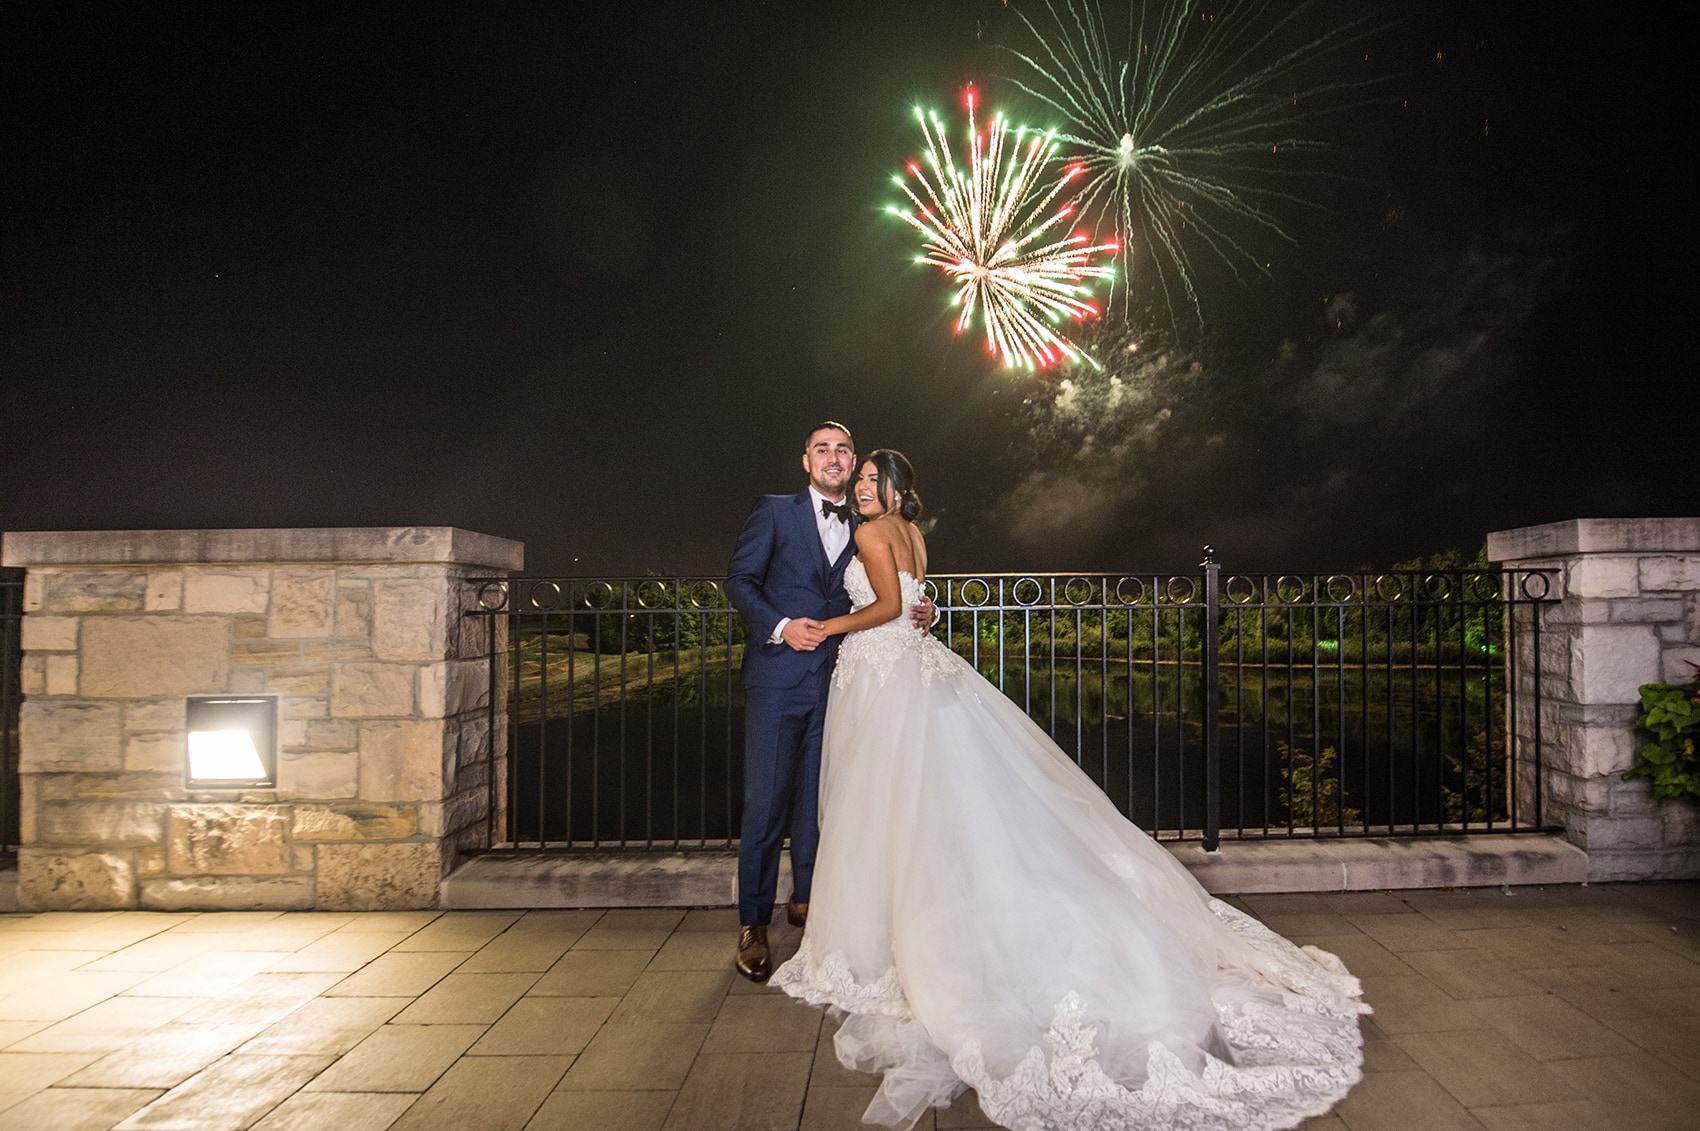 Have A Wedding With A Sparkling Bang!